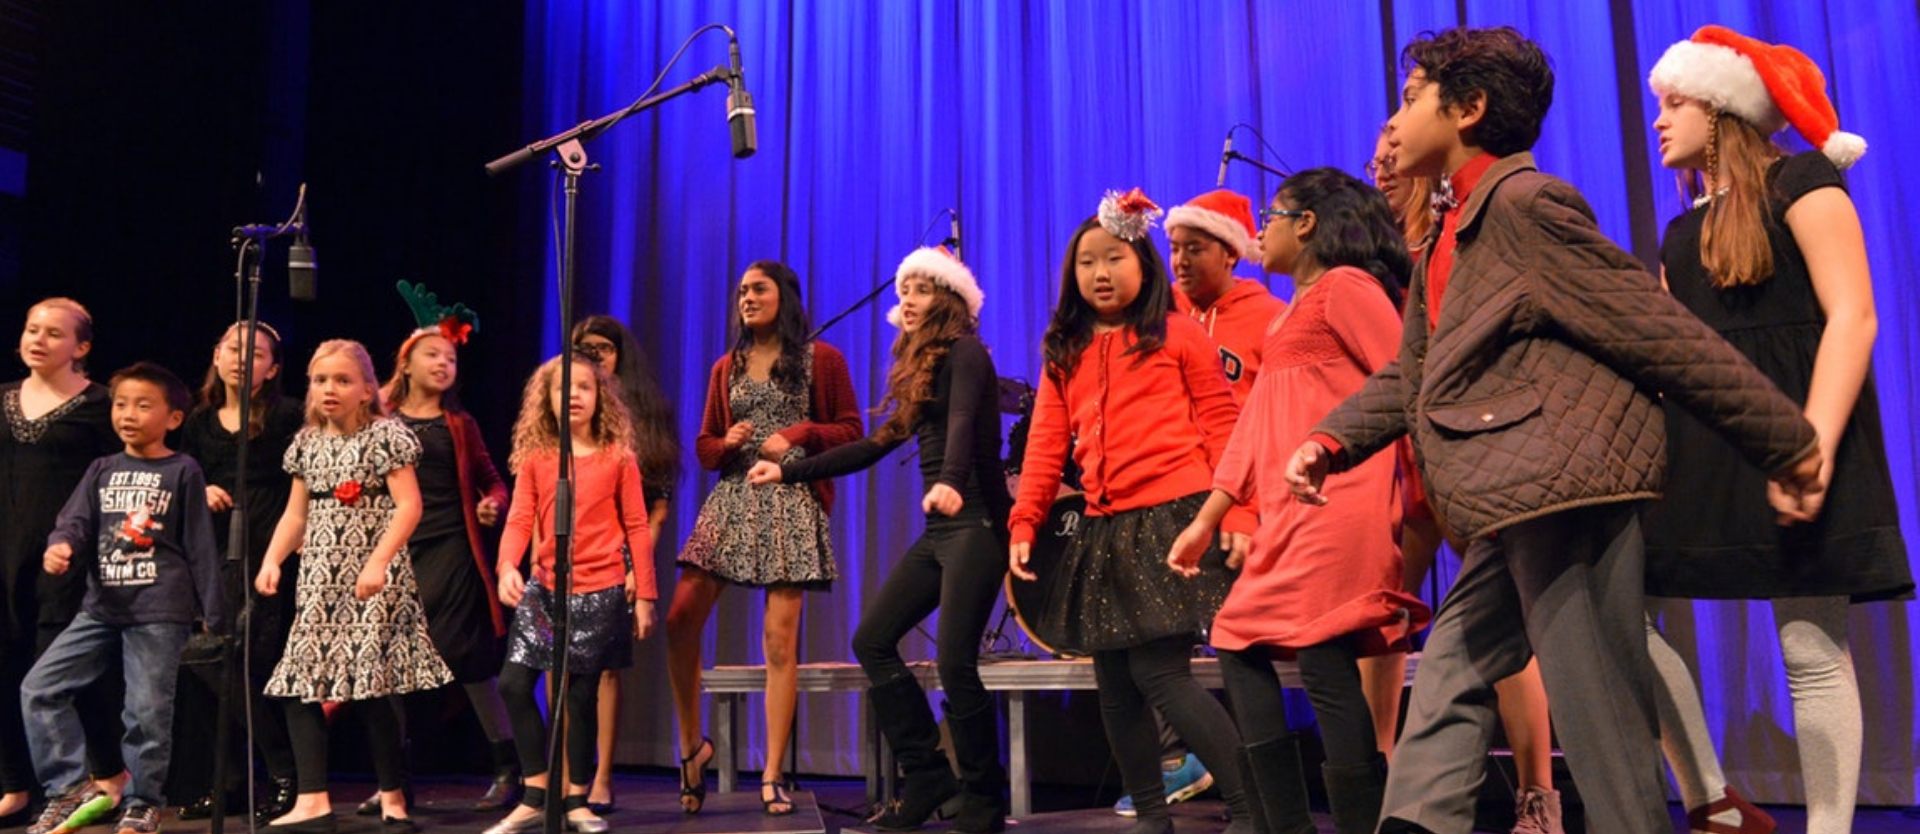 Holiday Youth Music Festival 2018